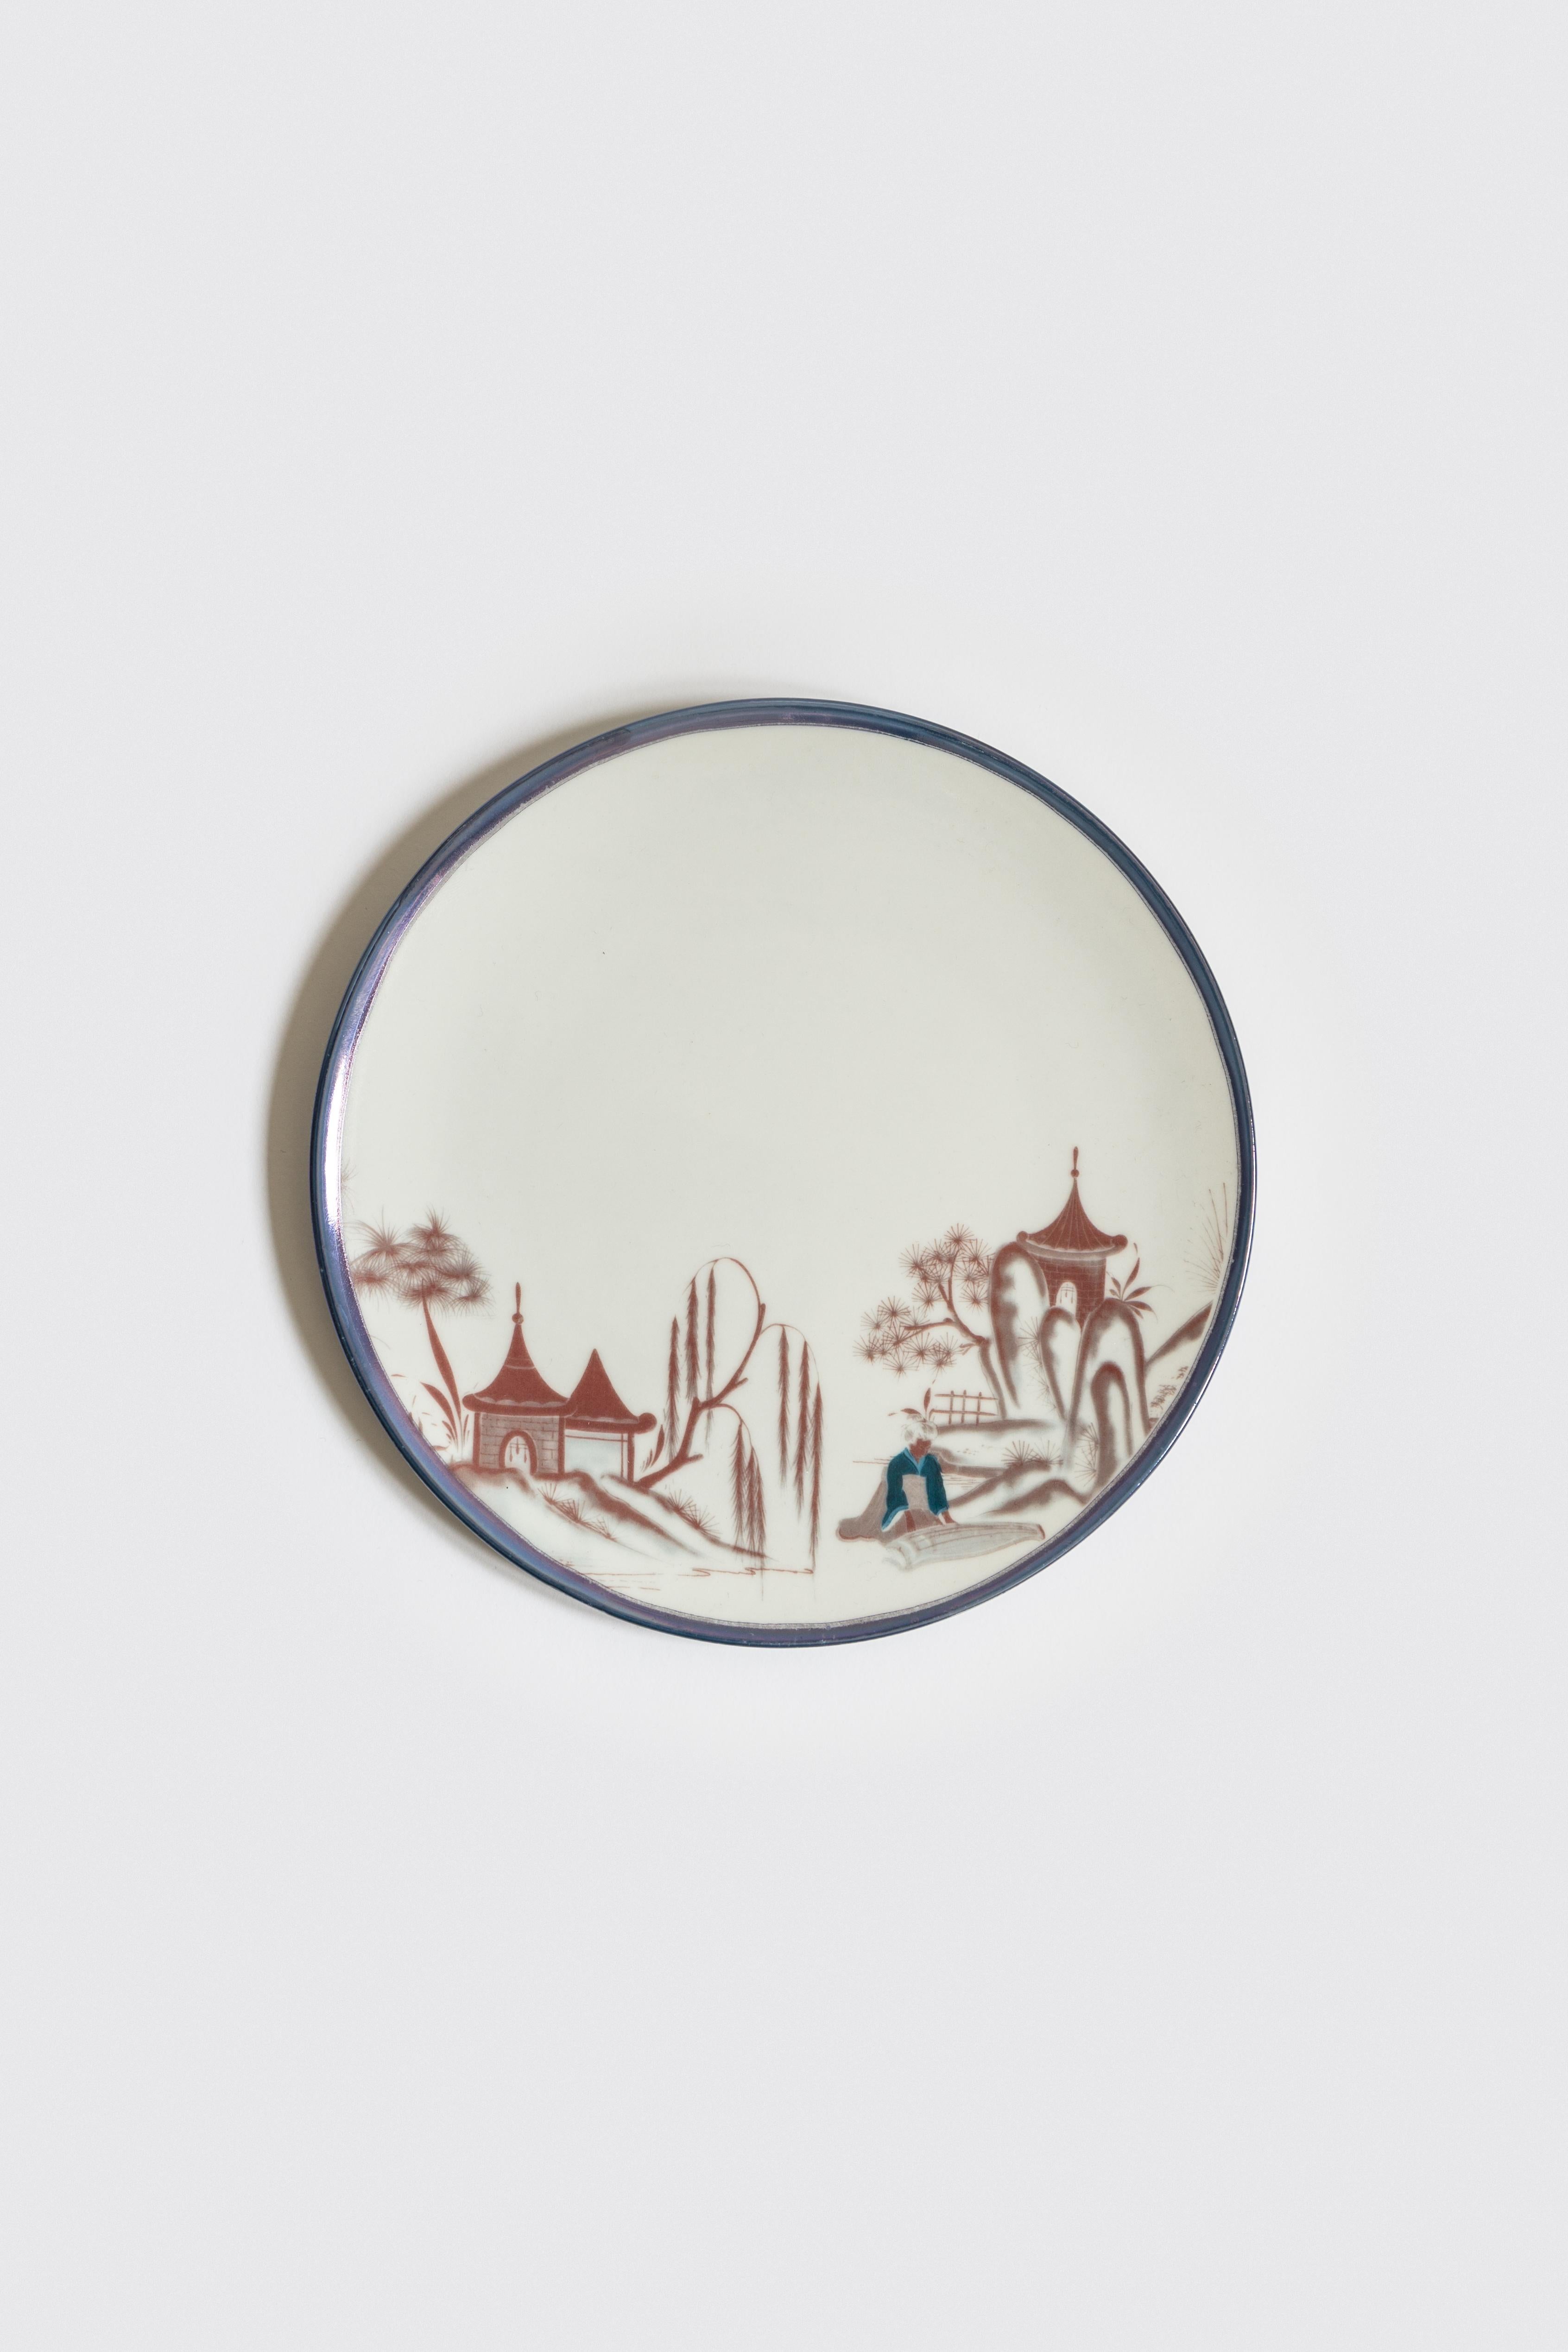 Bordeaux and blue are the primary colors of this Japan inspired collection of plates, where ancient Japanese scenes take place on the rivers of a fairy lake.